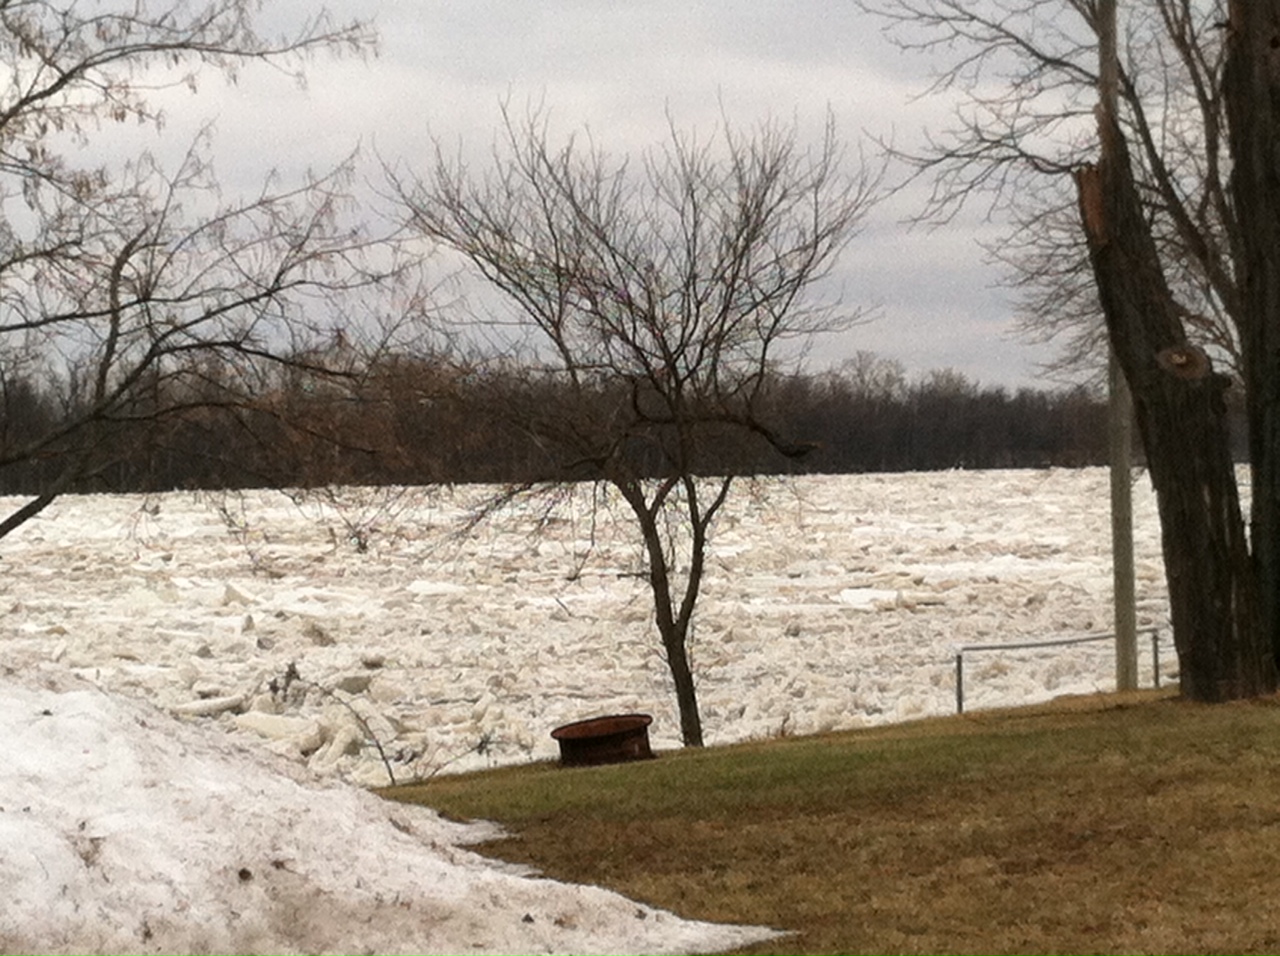 ice jam along the Maumee River a few miles upstream of Grand Rapids, OH